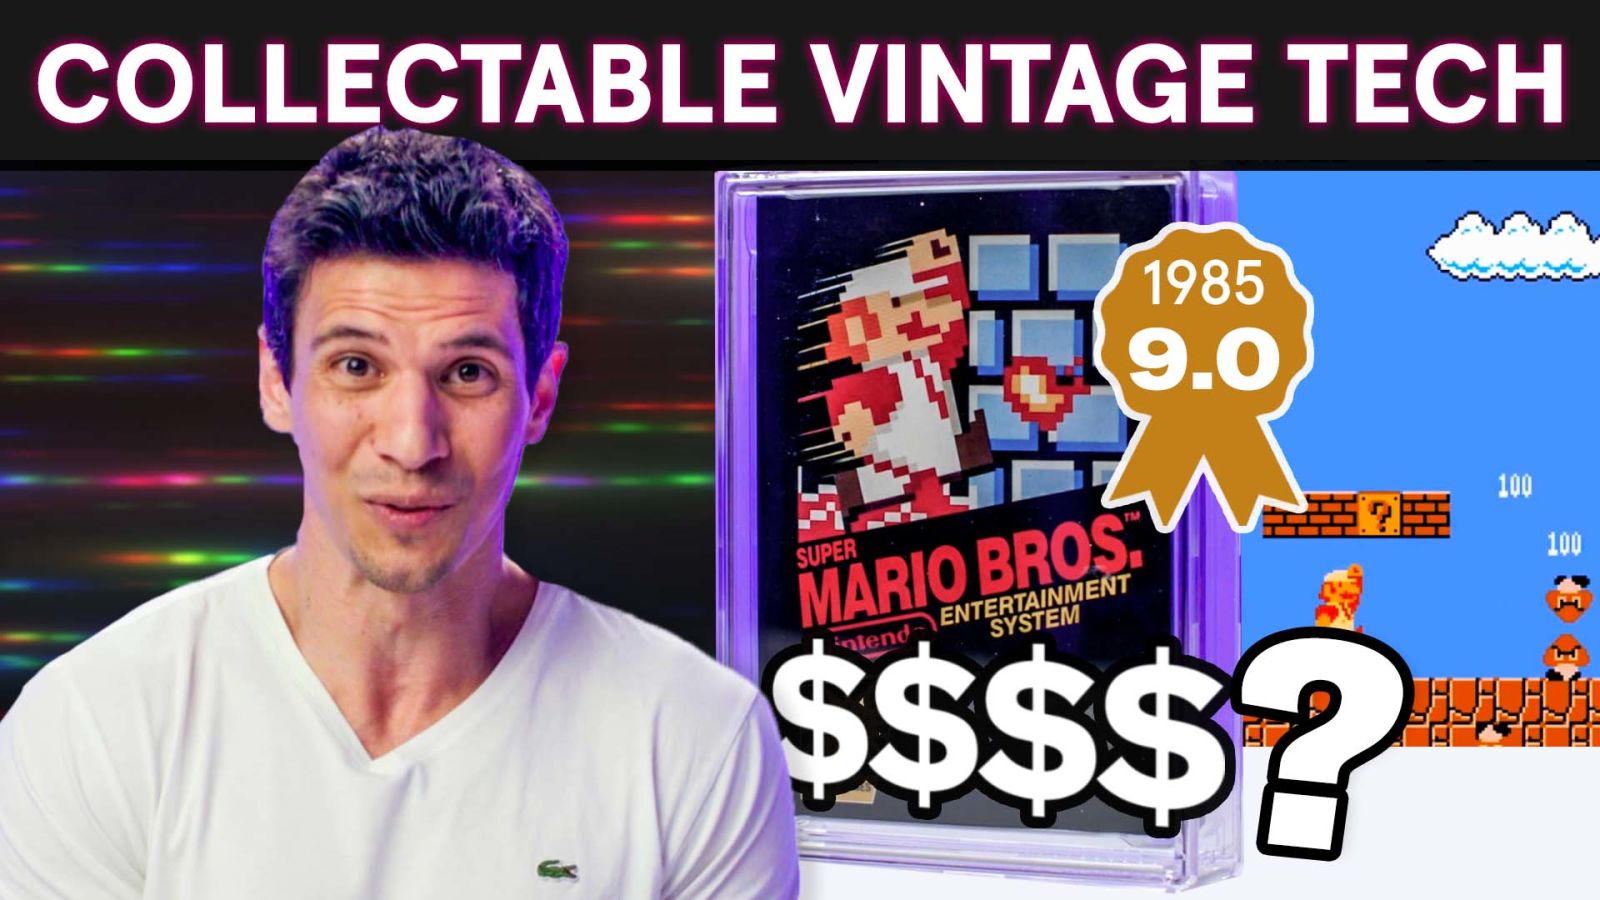 Pricing 5 High-End Collectable Vintage Tech Items ($3,000 to $60,000)